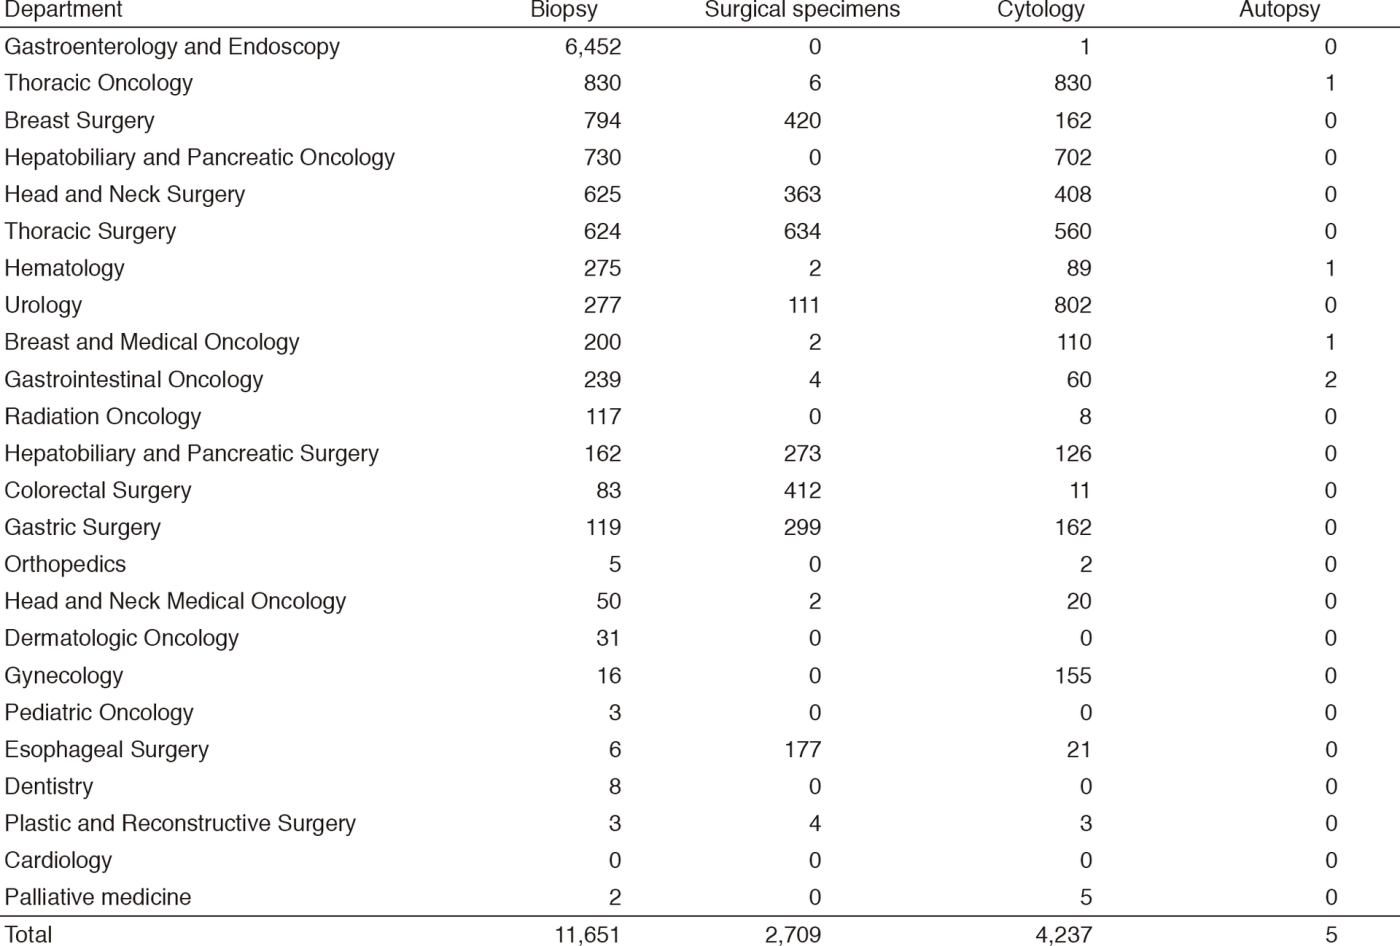 Table 1. Number of pathology and cytology samples examined at the Pathology Division in 2017 (Full Size)